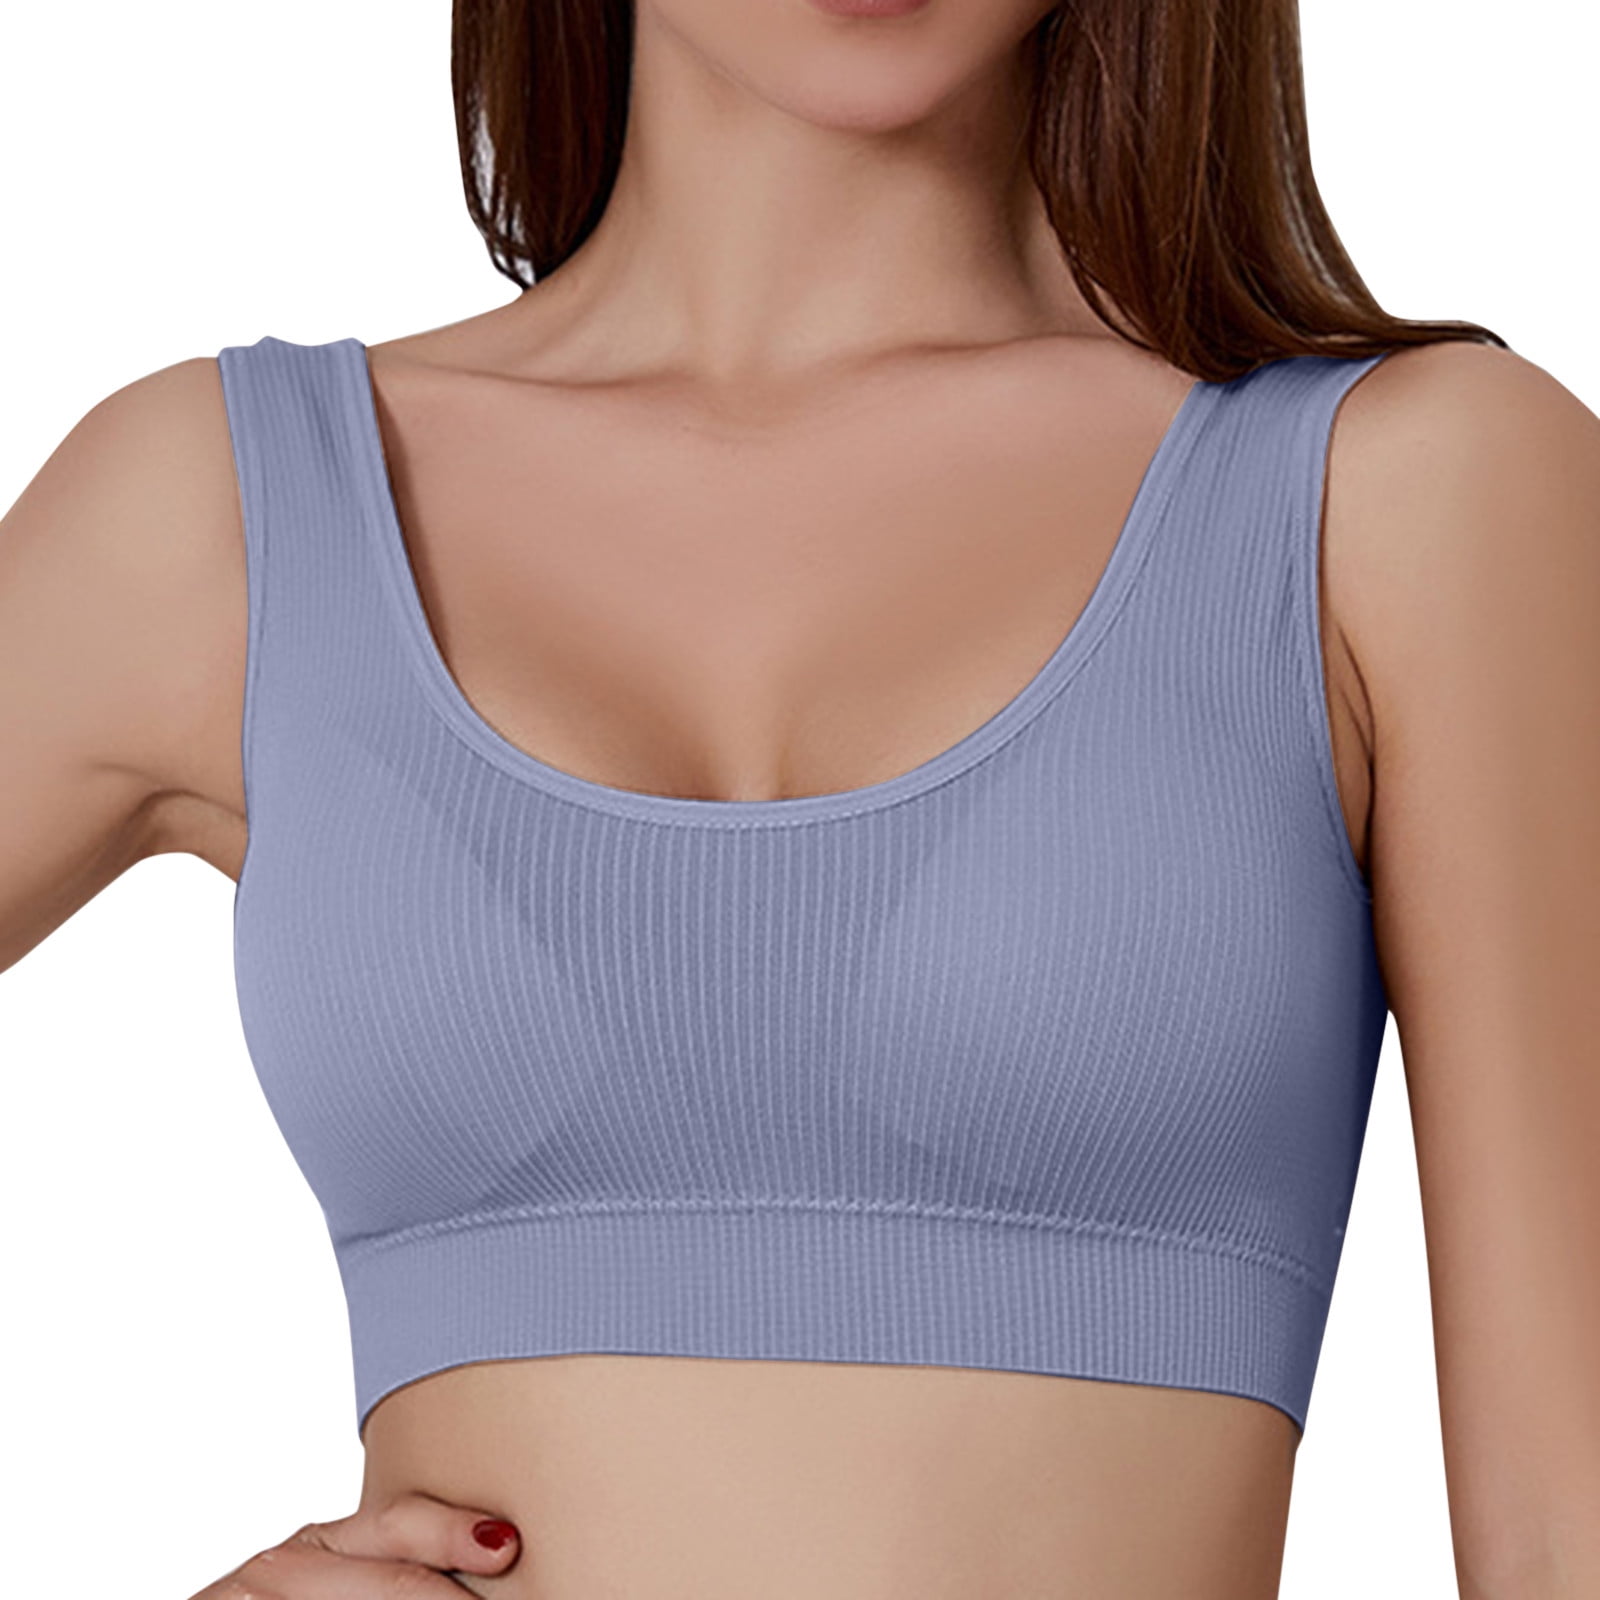 Tank Top with Built in Bra Supportive Sports Bras for Women